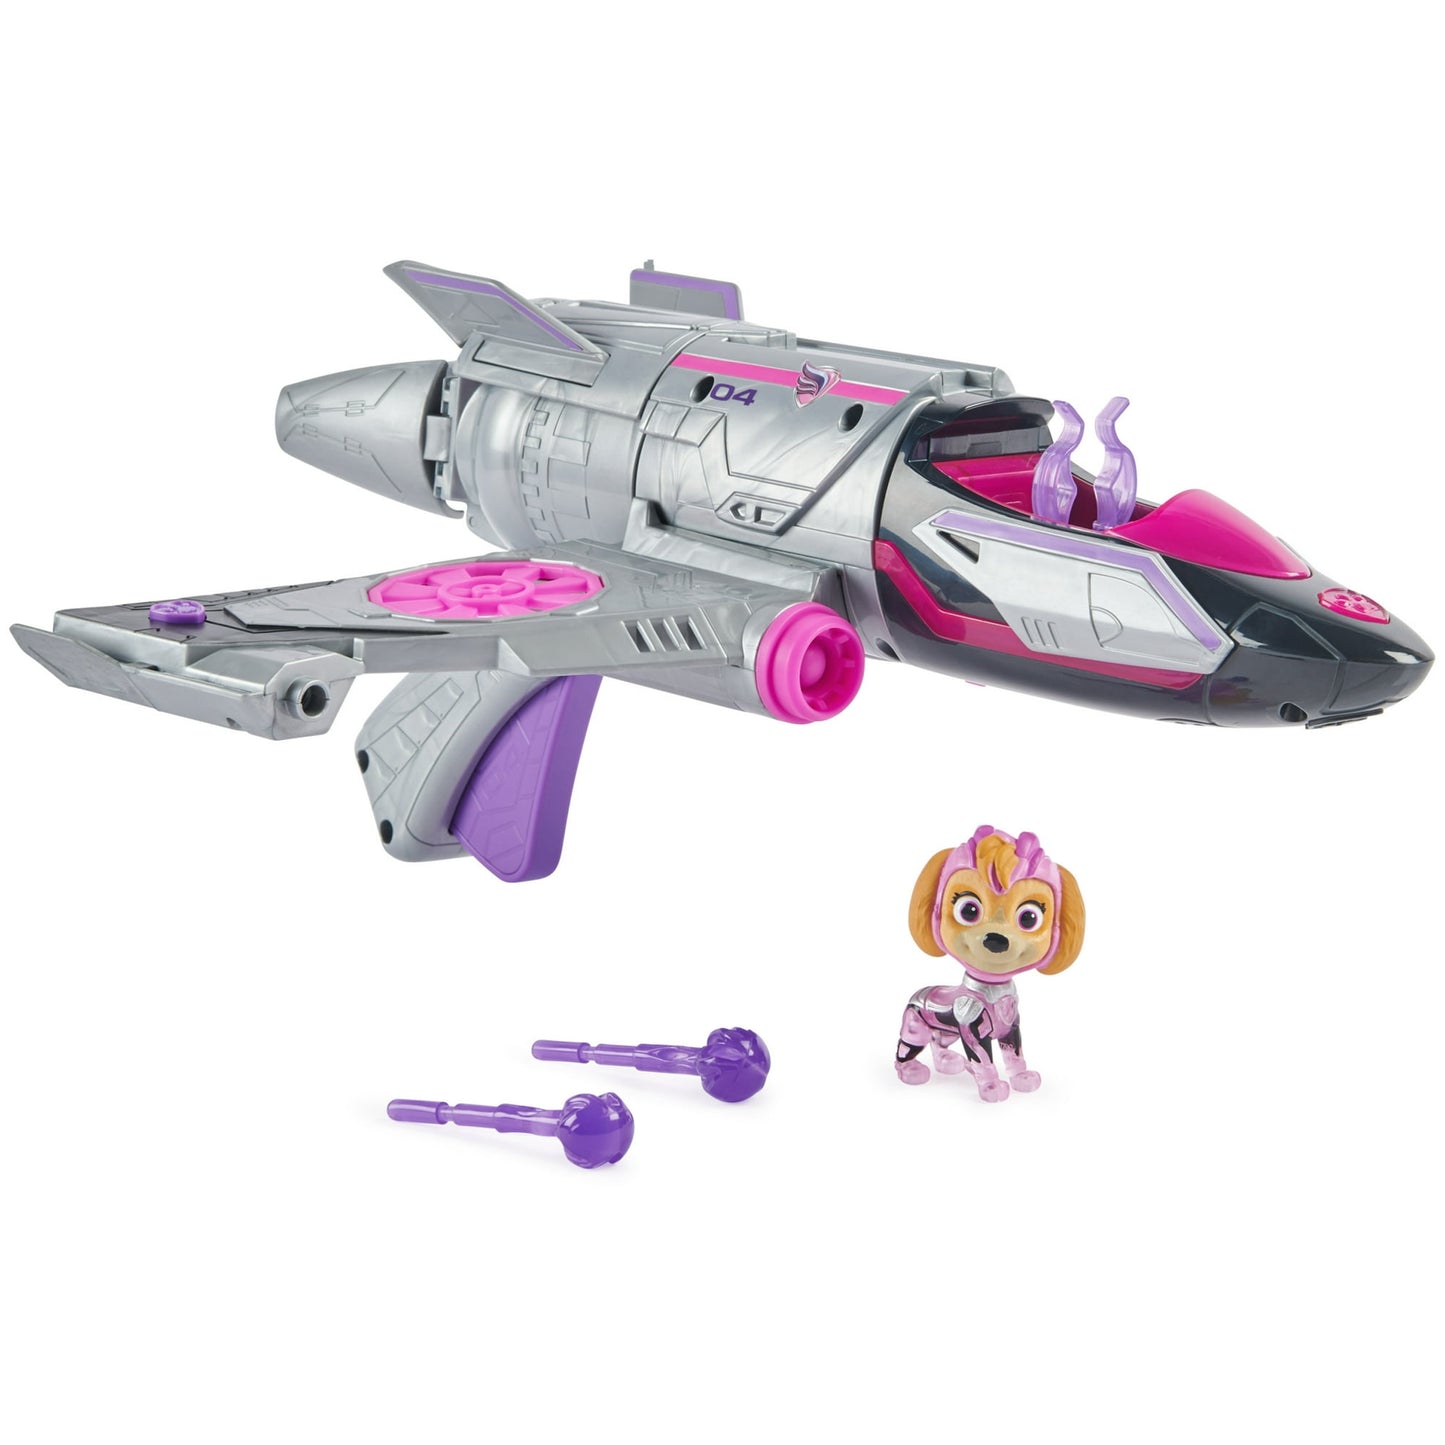 Paw Patrol: The Mighty Movie, Transforming Rescue Jet with Skye Mighty Pups Action Figure, Lights and Sounds, Kids Toys for Boys & Girls 3+